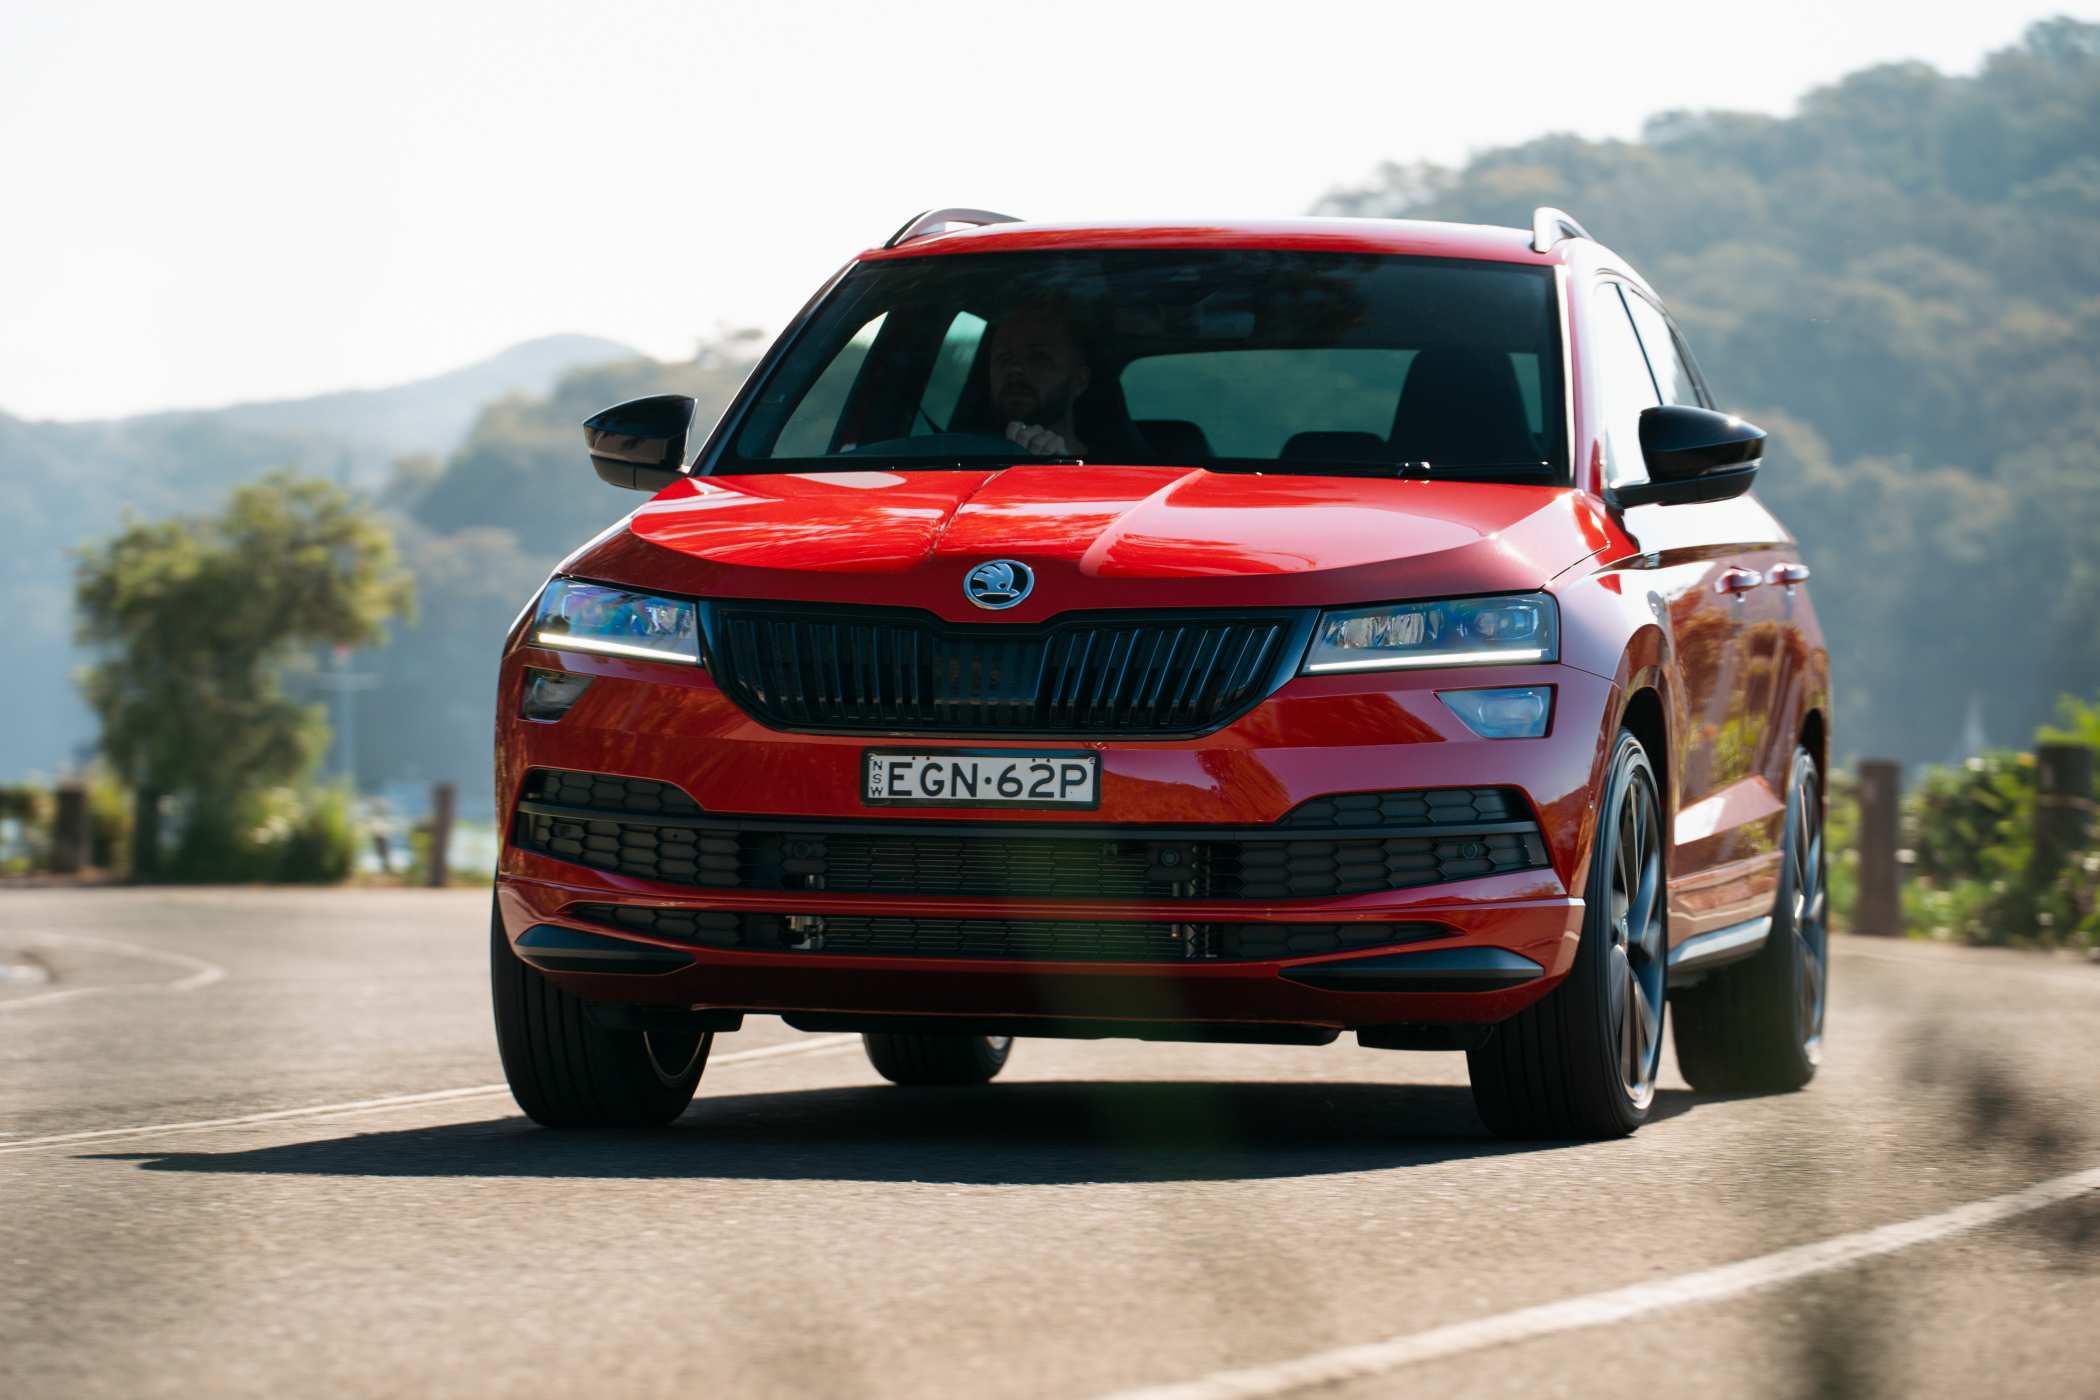 Powered by the Volkswagen Group's 2.0-litre turbo petrol EA888, the Sportline puts 140kW and 320Nm to the road via a 7-speed DQ381 DSG transmission and all-wheel-drive. Drive Mode Select is standard.